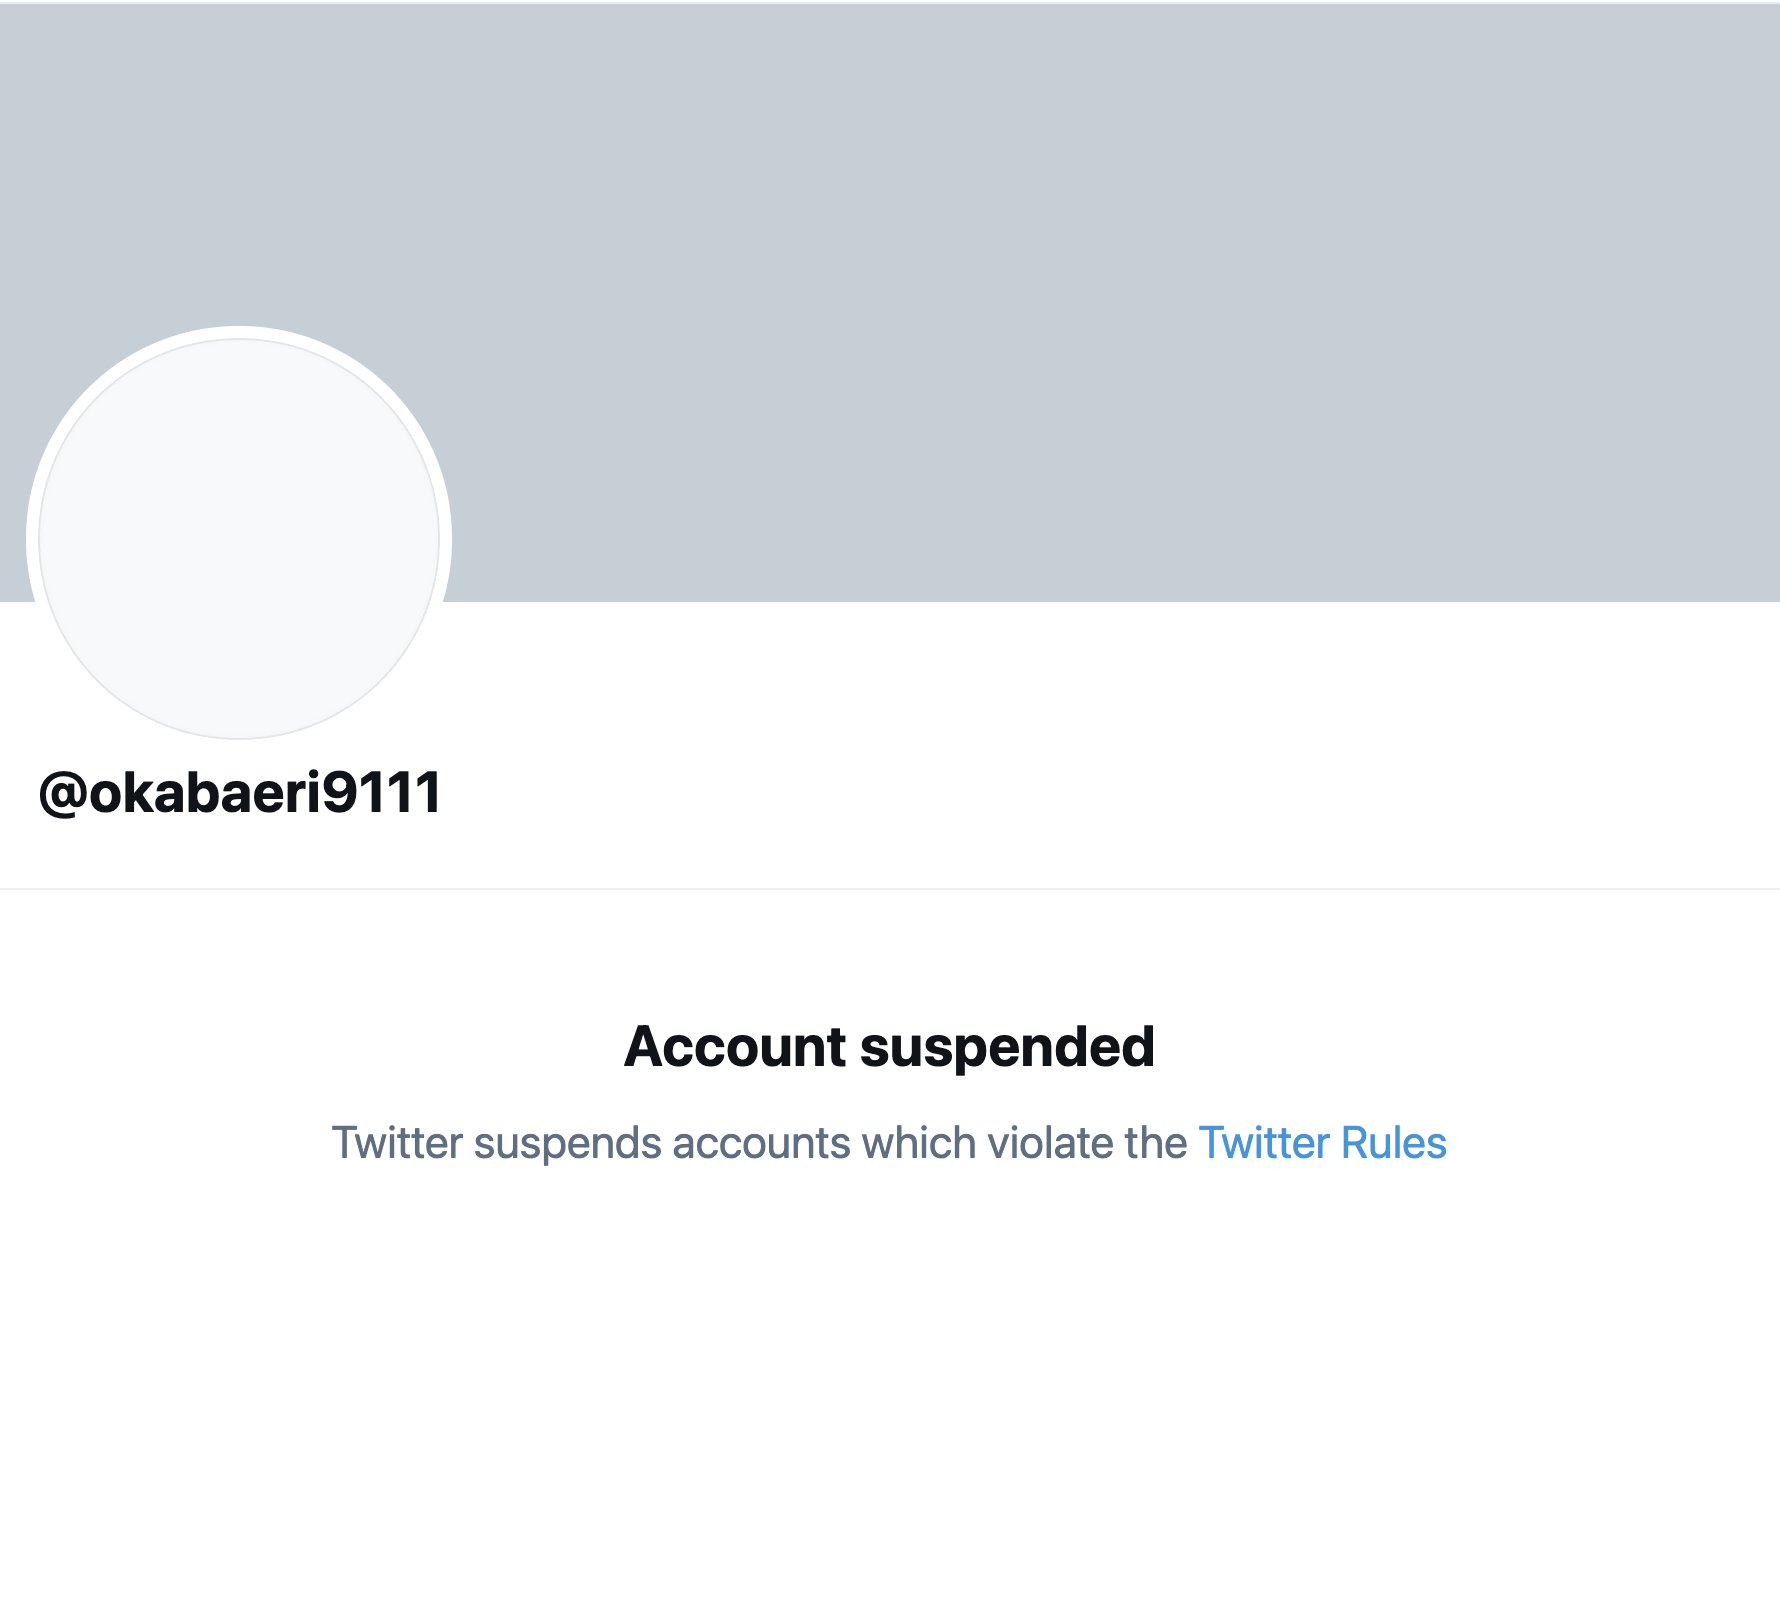 Shayan Sardarizadeh on X: Twitter has suspended Eri, the leader